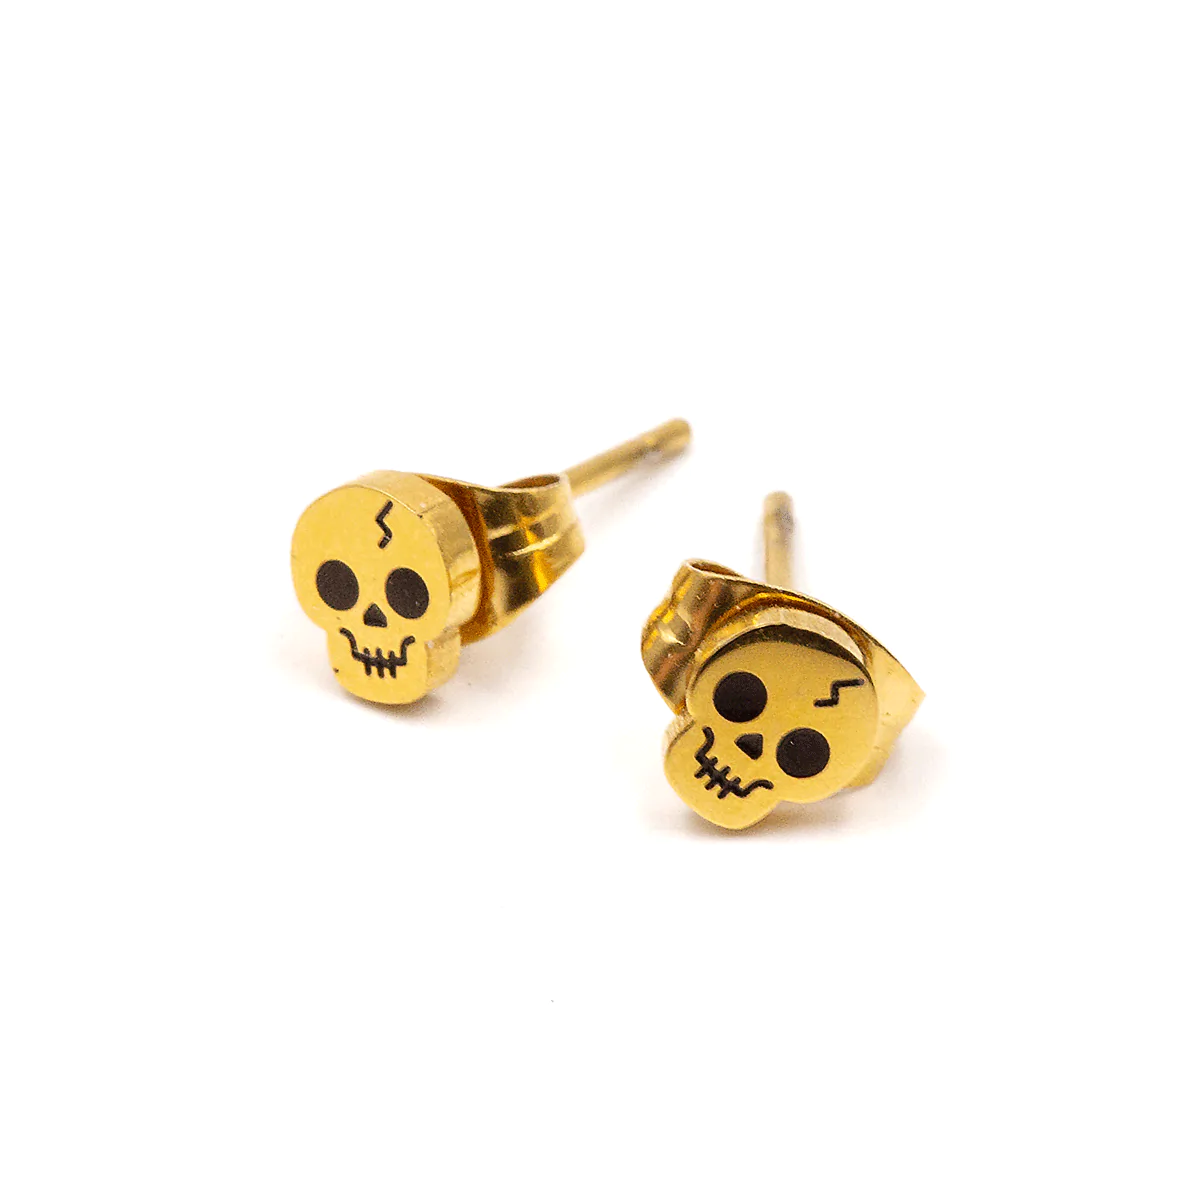 THESE ARE THINGS GOLD SKULL MICRO STUD EARRINGS